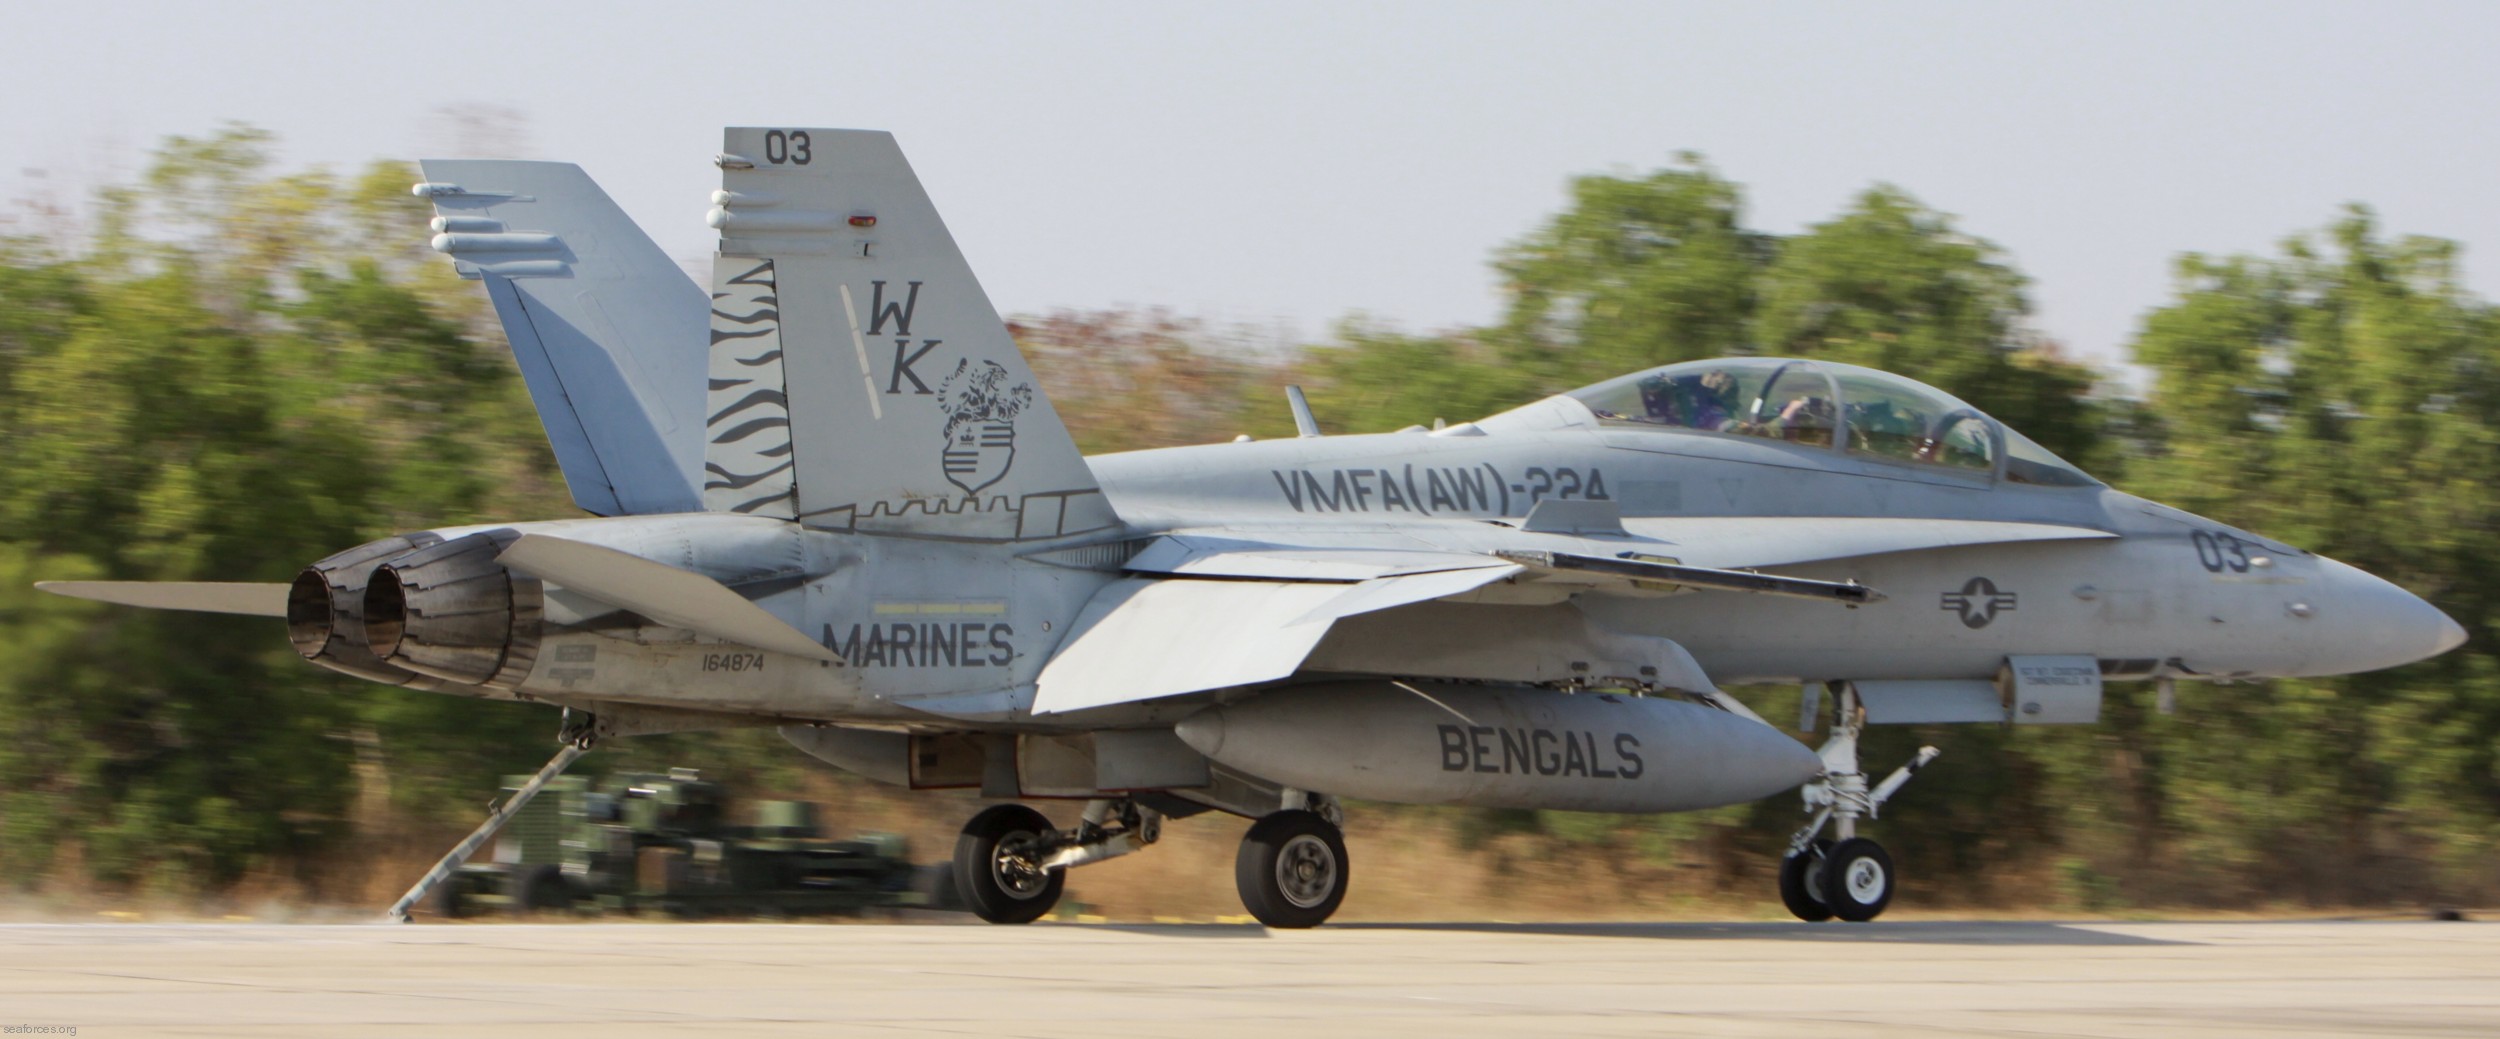 vmfa(aw)-224 bengals marine fighter attack squadron usmc f/a-18d hornet 12